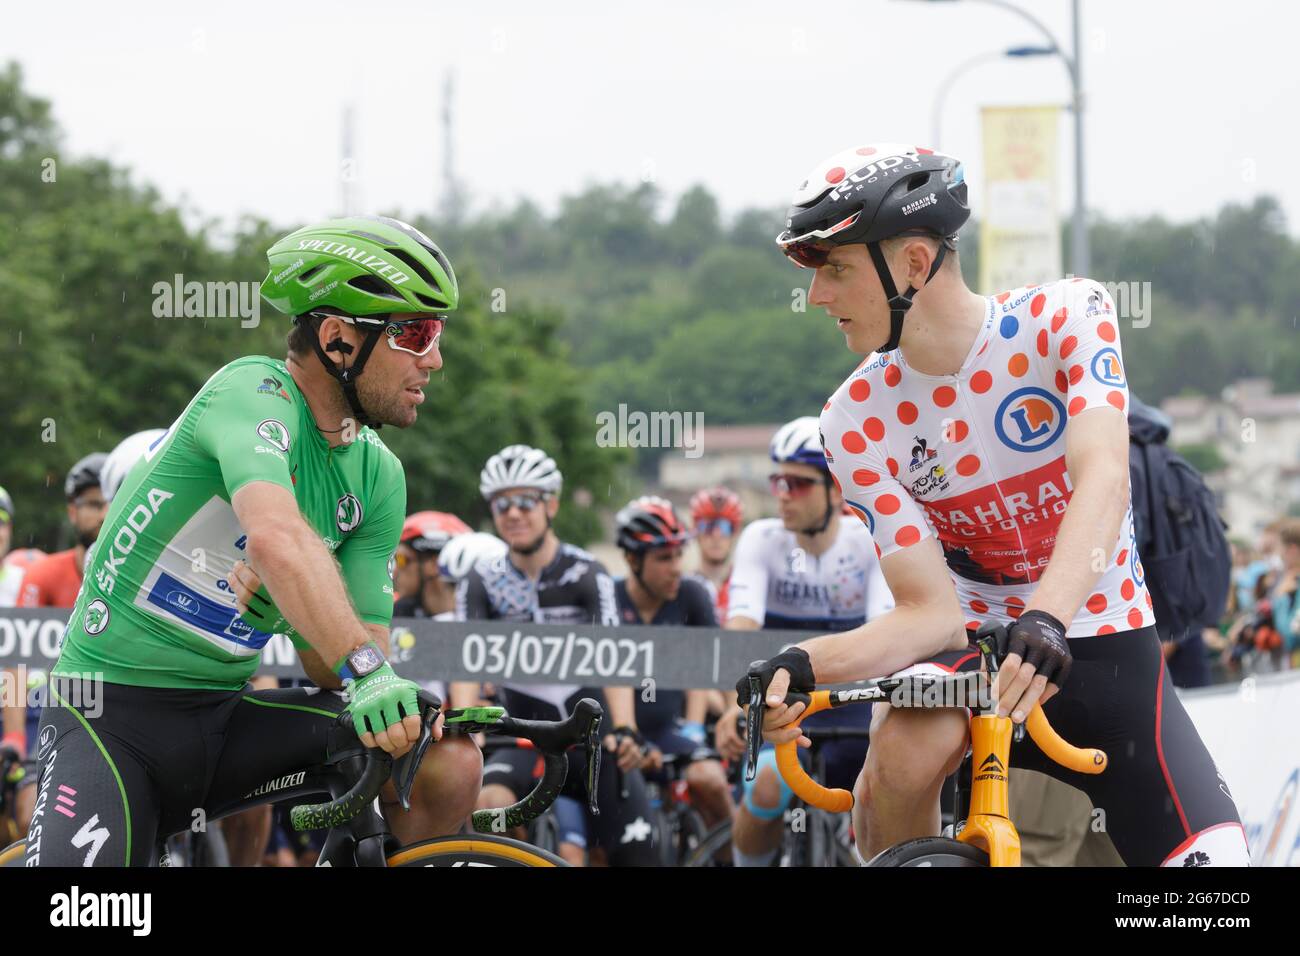 Oyonnax, France. 03 July 2021. Matej Mohoric and Mark Cavendish at the start of the 8th stage of the Tour de France in Oyonnax, France. Julian Elliott News Photography Credit: Julian Elliott/Alamy Live News Stock Photo